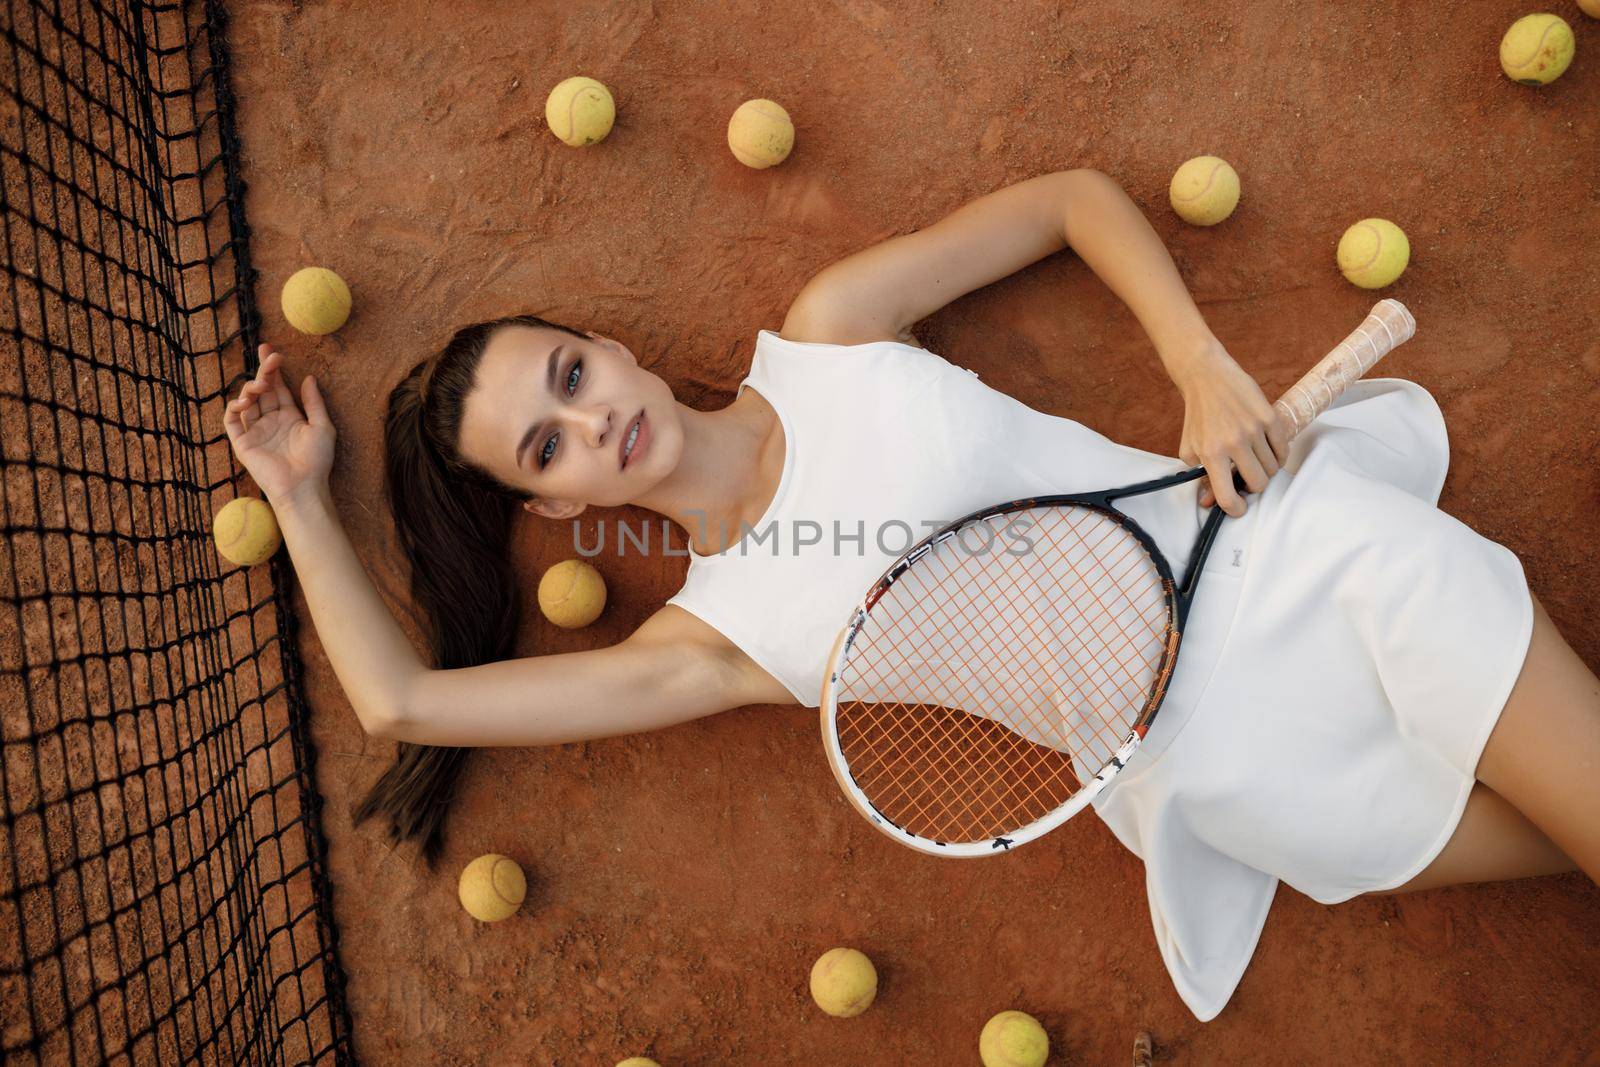 Young woman tennis player with racket. fashion portrait by splash